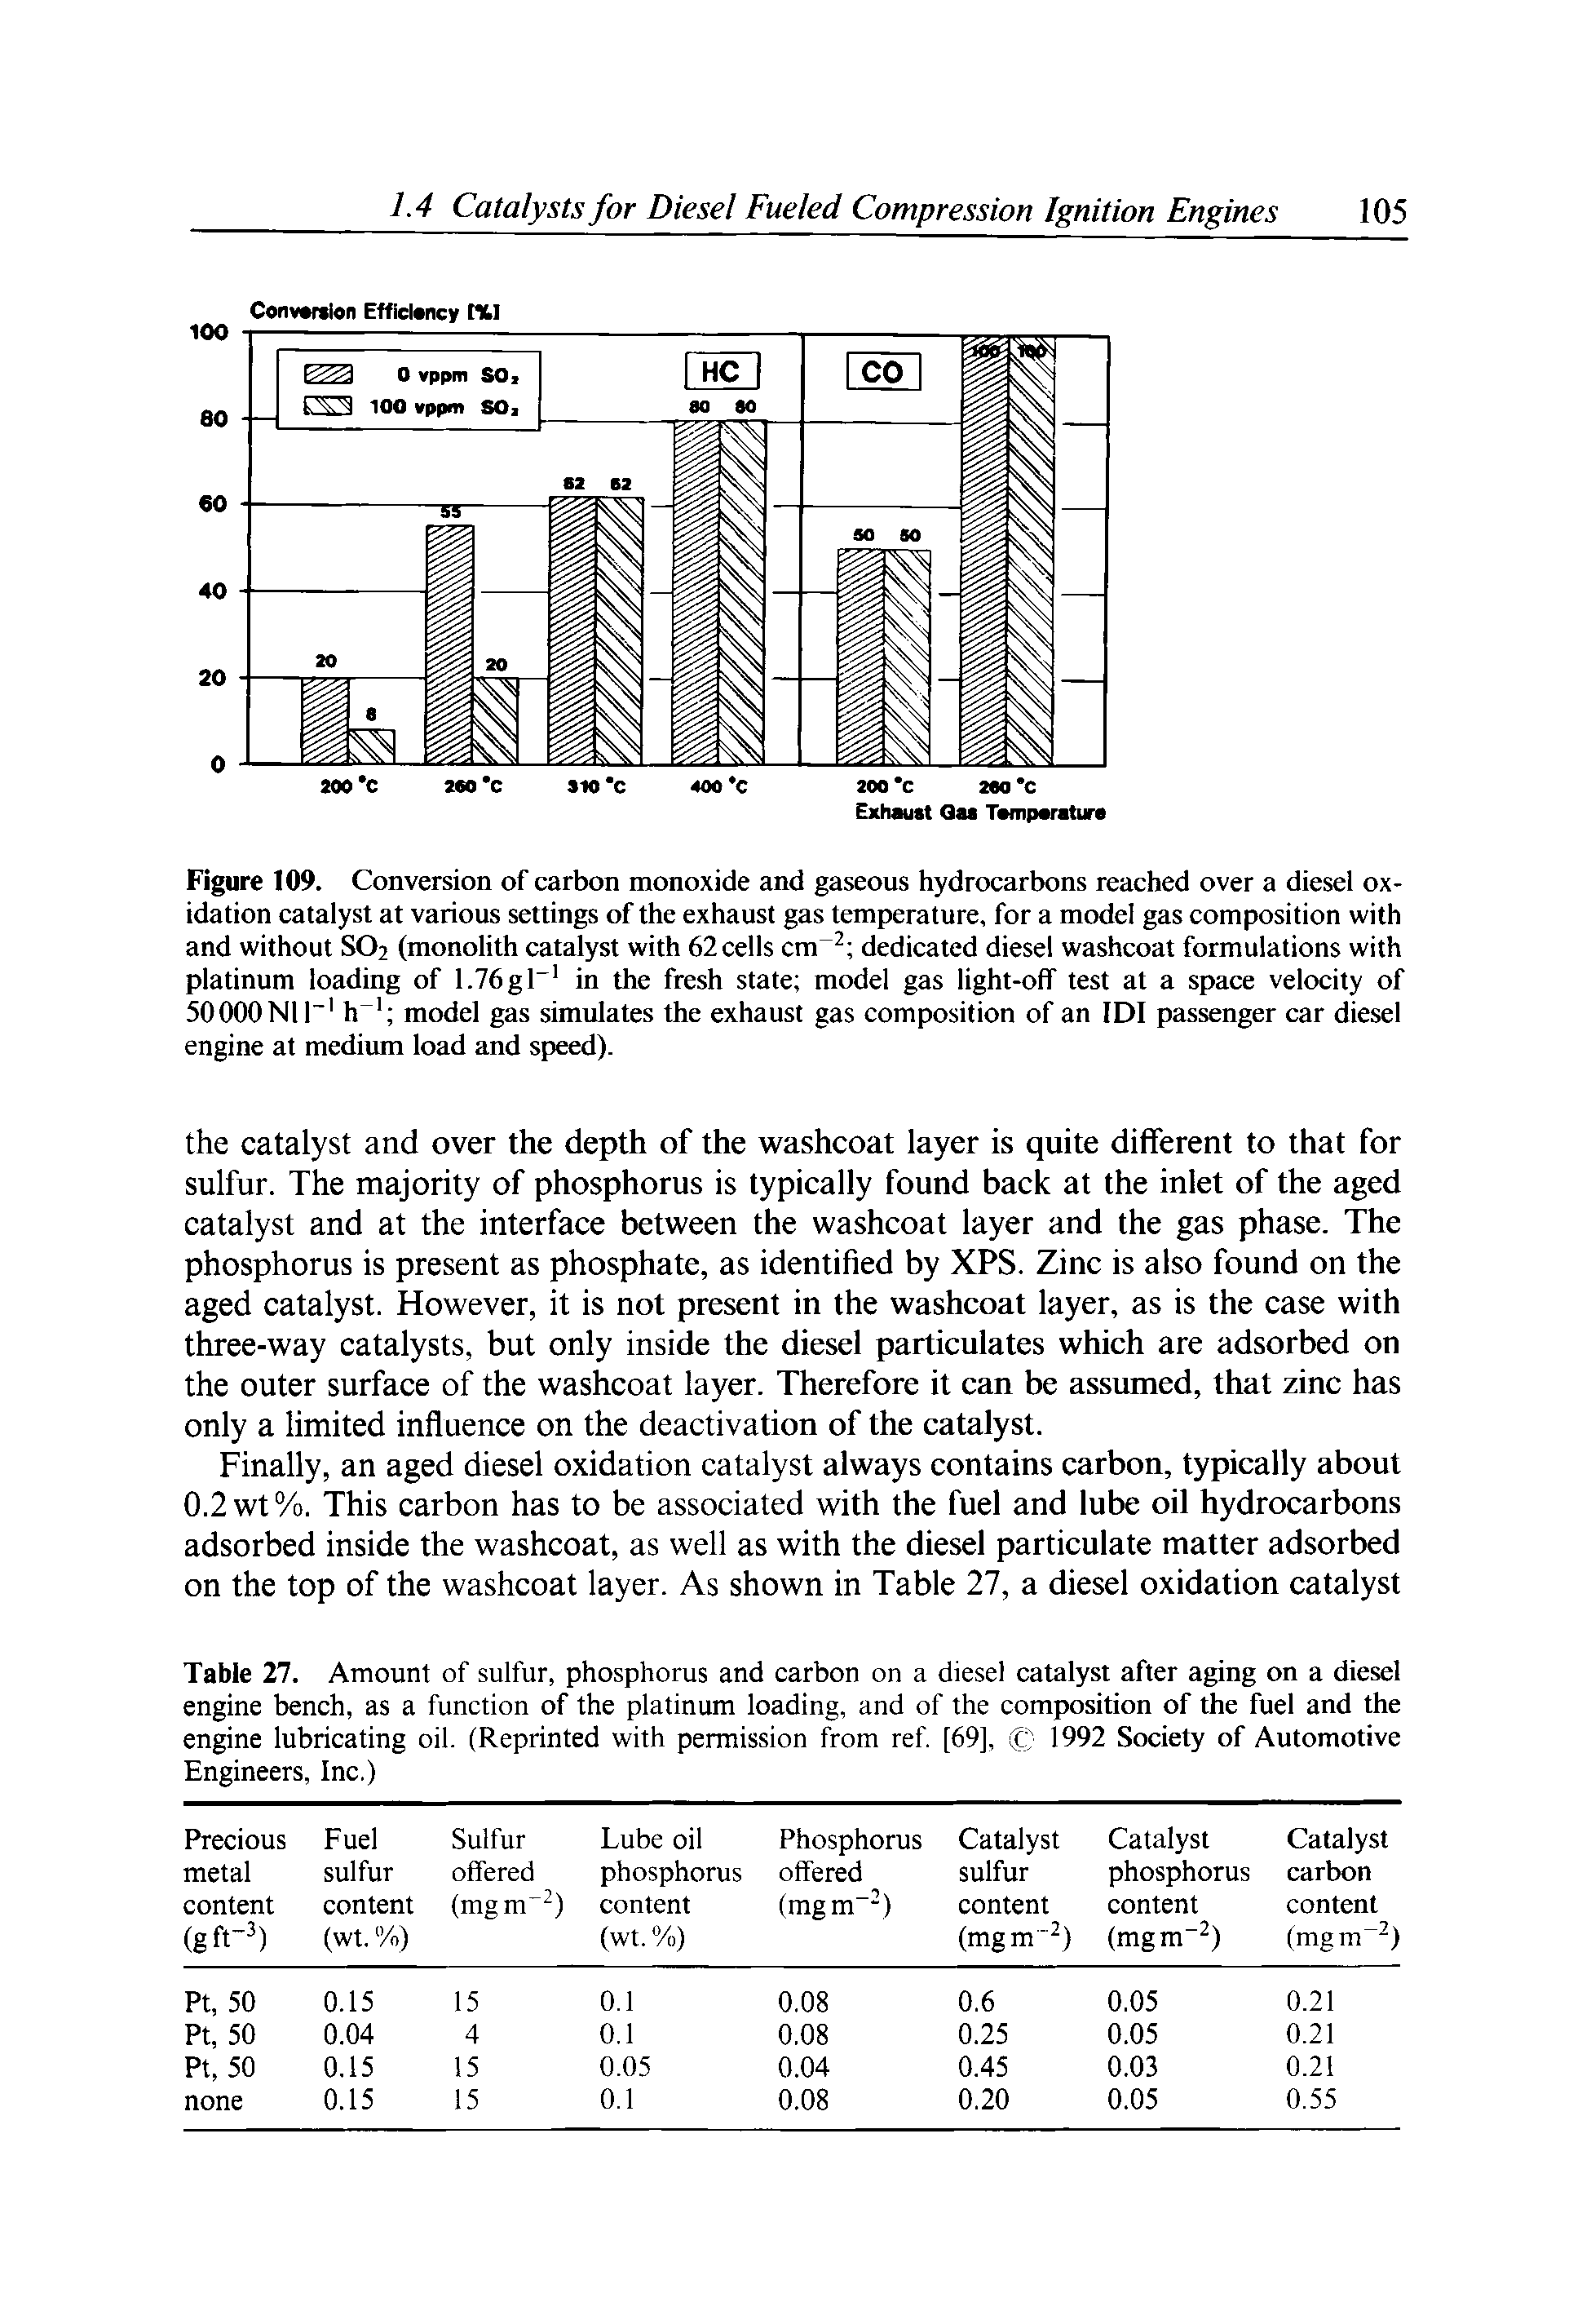 Table 27. Amount of sulfur, phosphorus and carbon on a diesel catalyst after aging on a diesel engine bench, as a function of the platinum loading, and of the composition of the fuel and the engine lubricating oil. (Reprinted with permission from ref [69], C 1992 Society of Automotive Engineers, Inc.)...